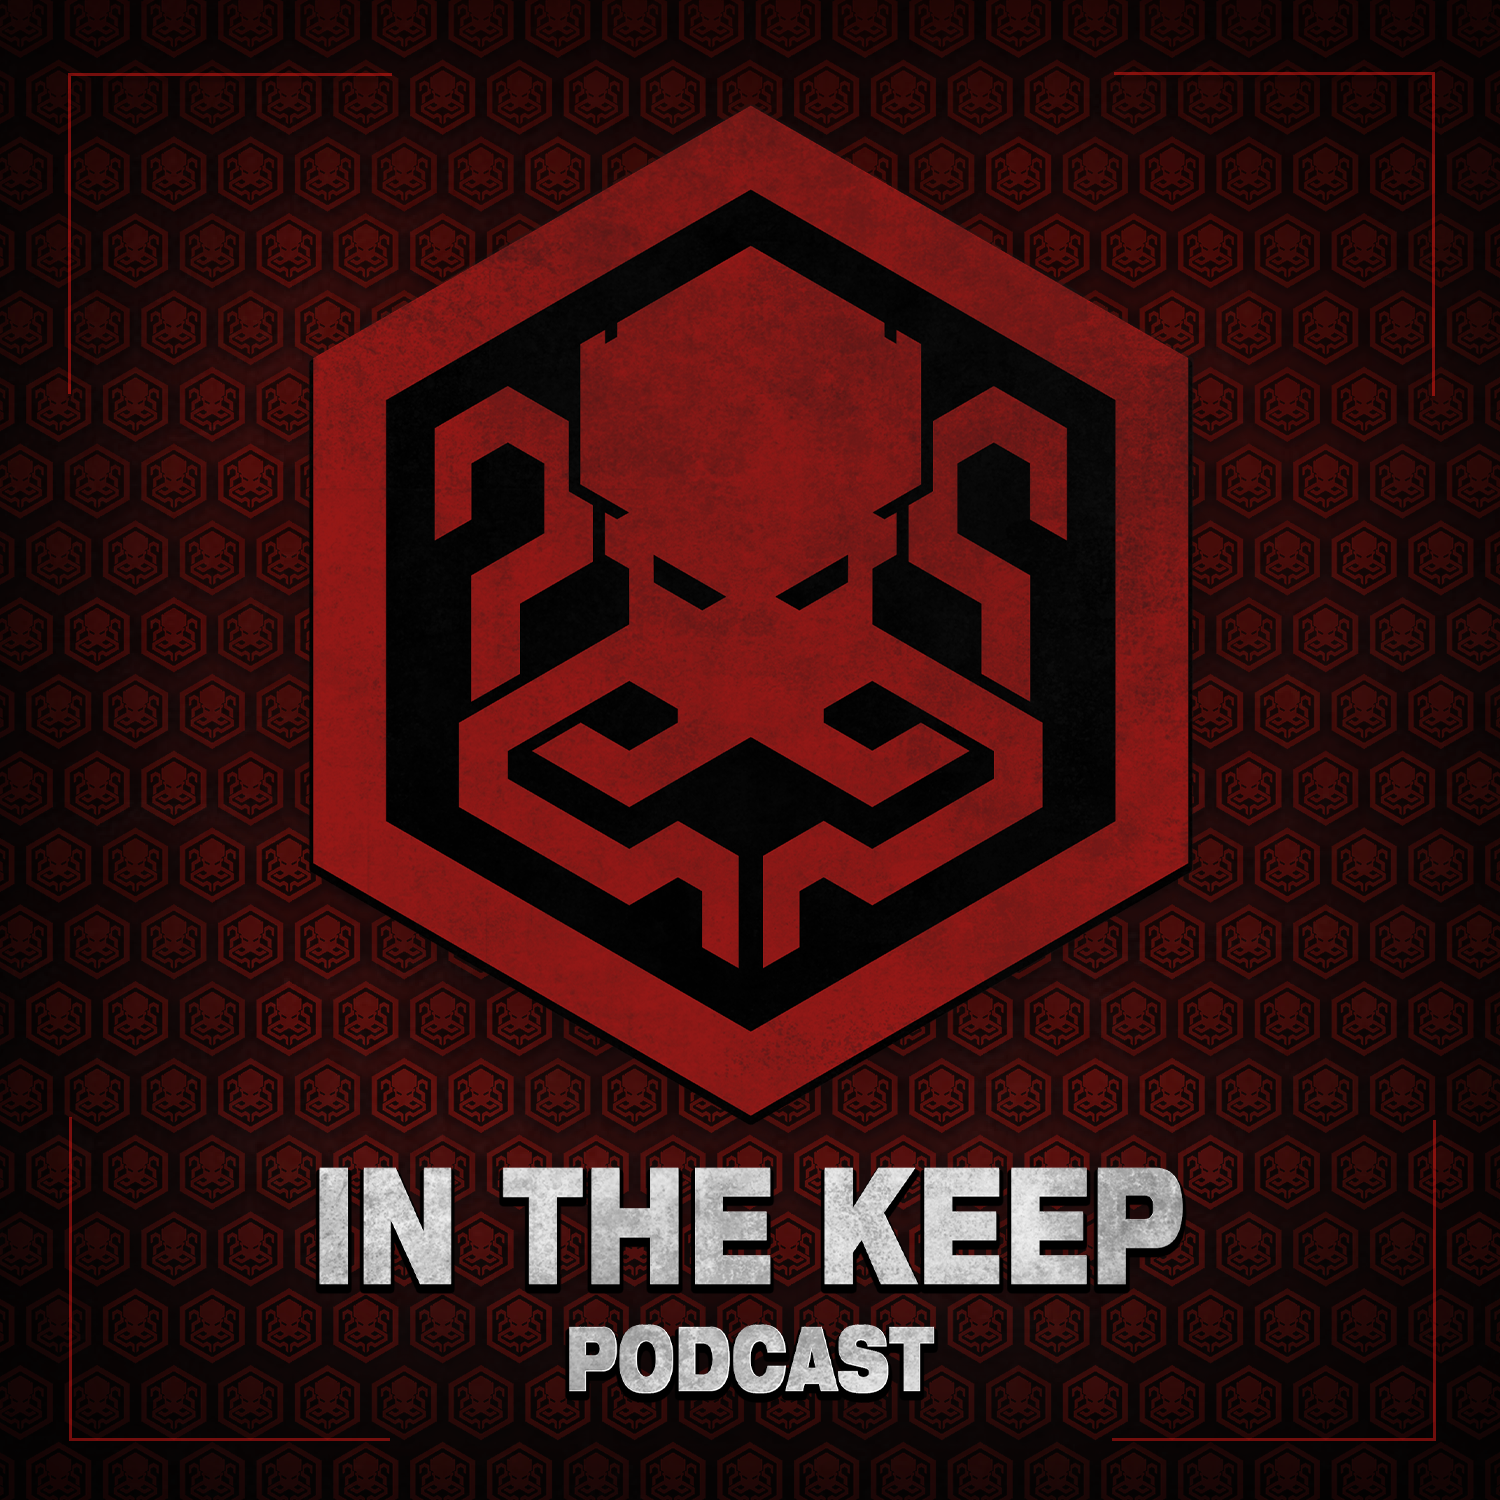 In The Keep Podcast – #100 Part 2: Violentheart, Uncle Had, nAeb, RedEyes-GreenDragon, Flambeau (In The Keep)